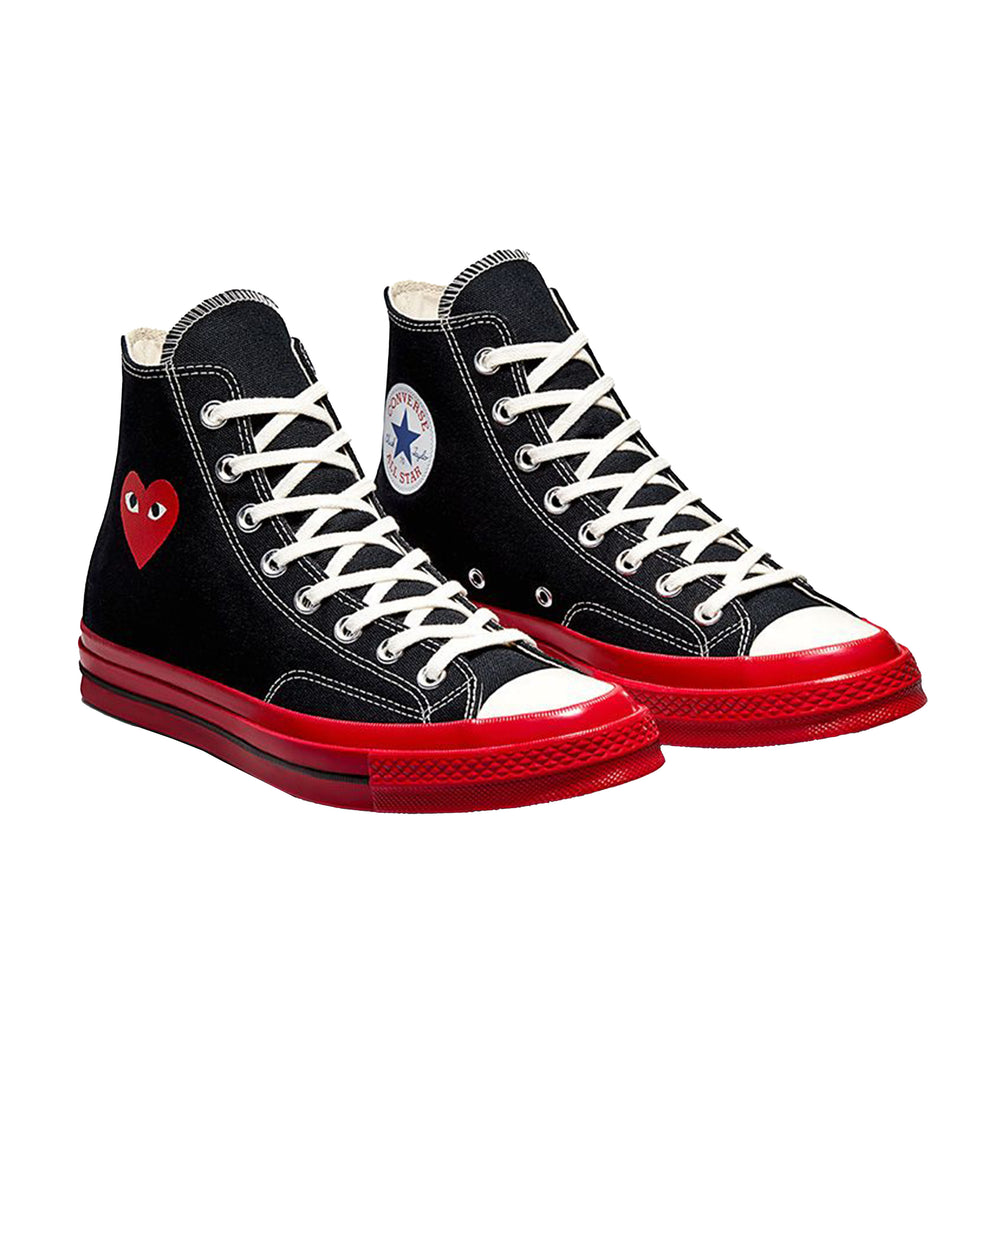 Comme Garcons X Converse Red Sole Chuck 70 High Top | STASHED